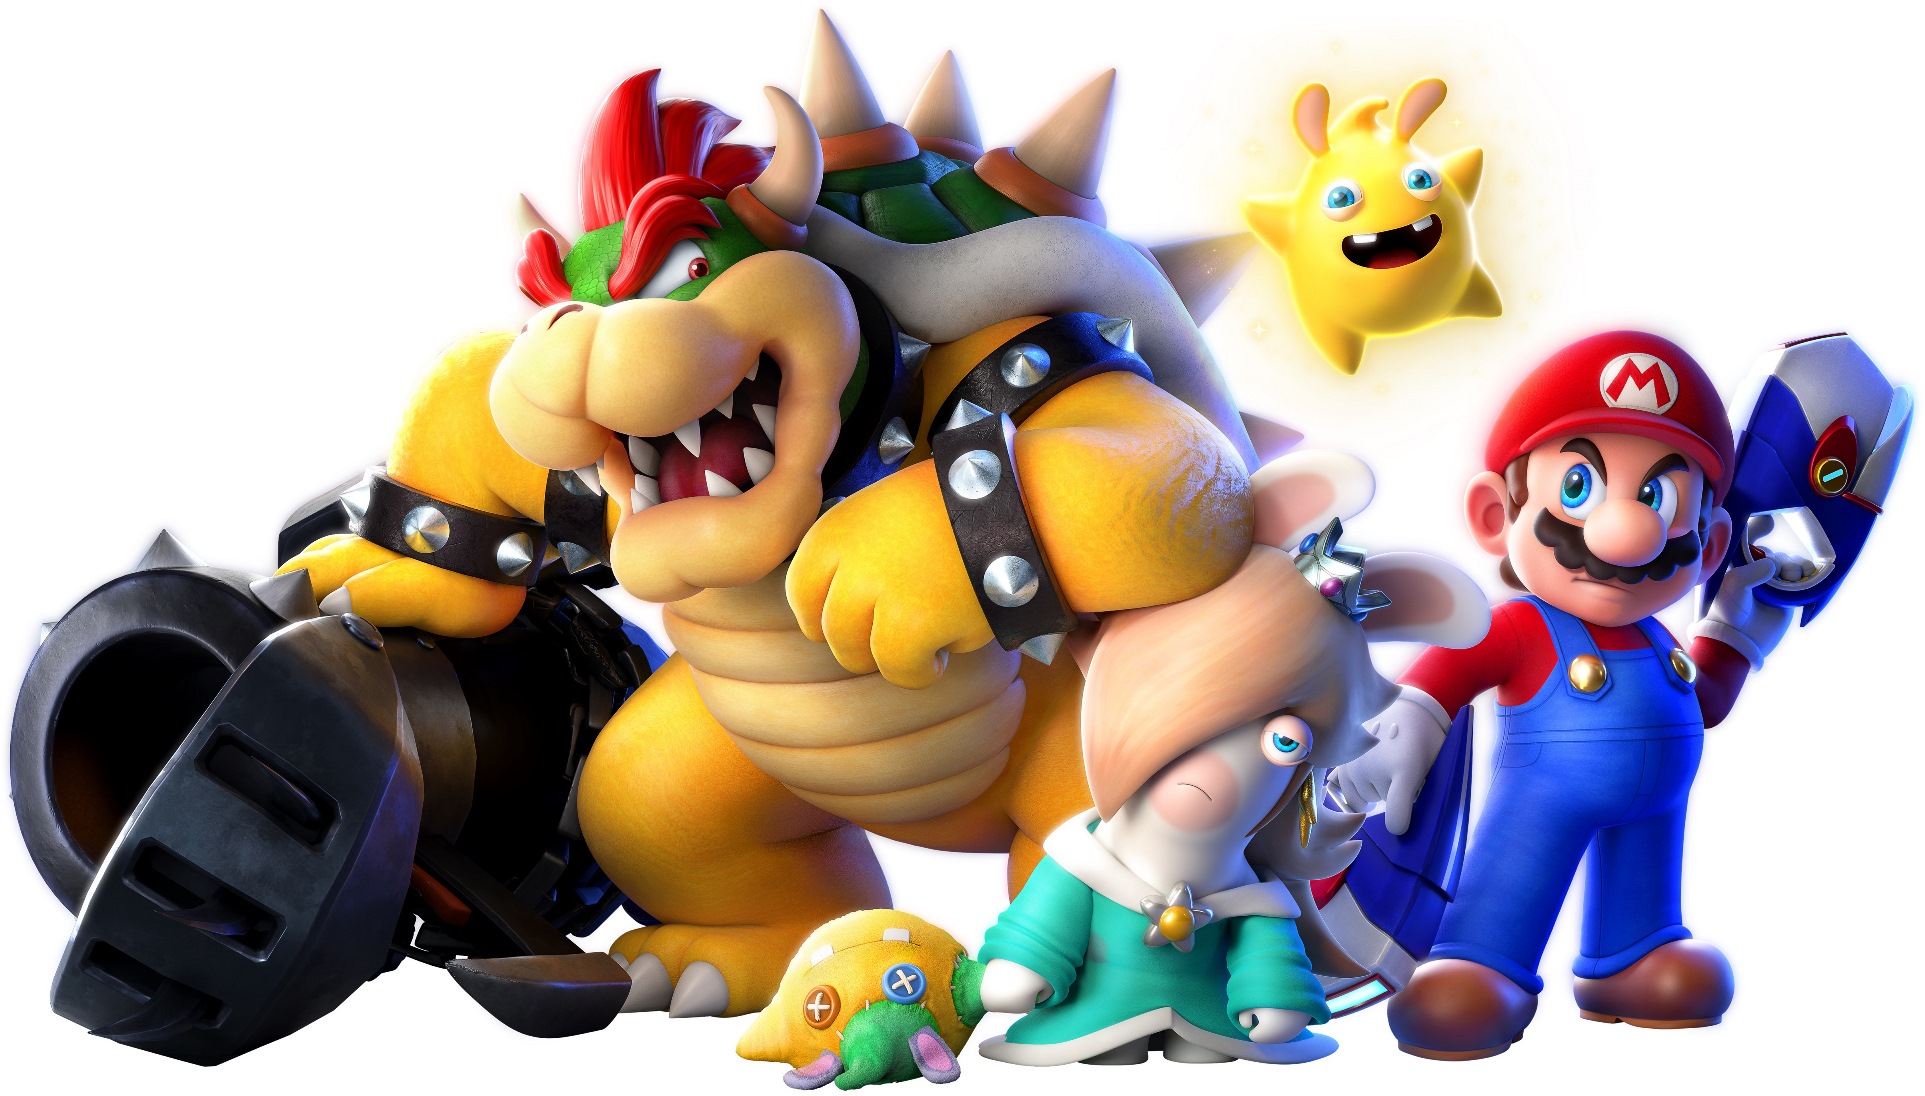 Mario + Rabbids Sparks of Hope character art for the whole roster